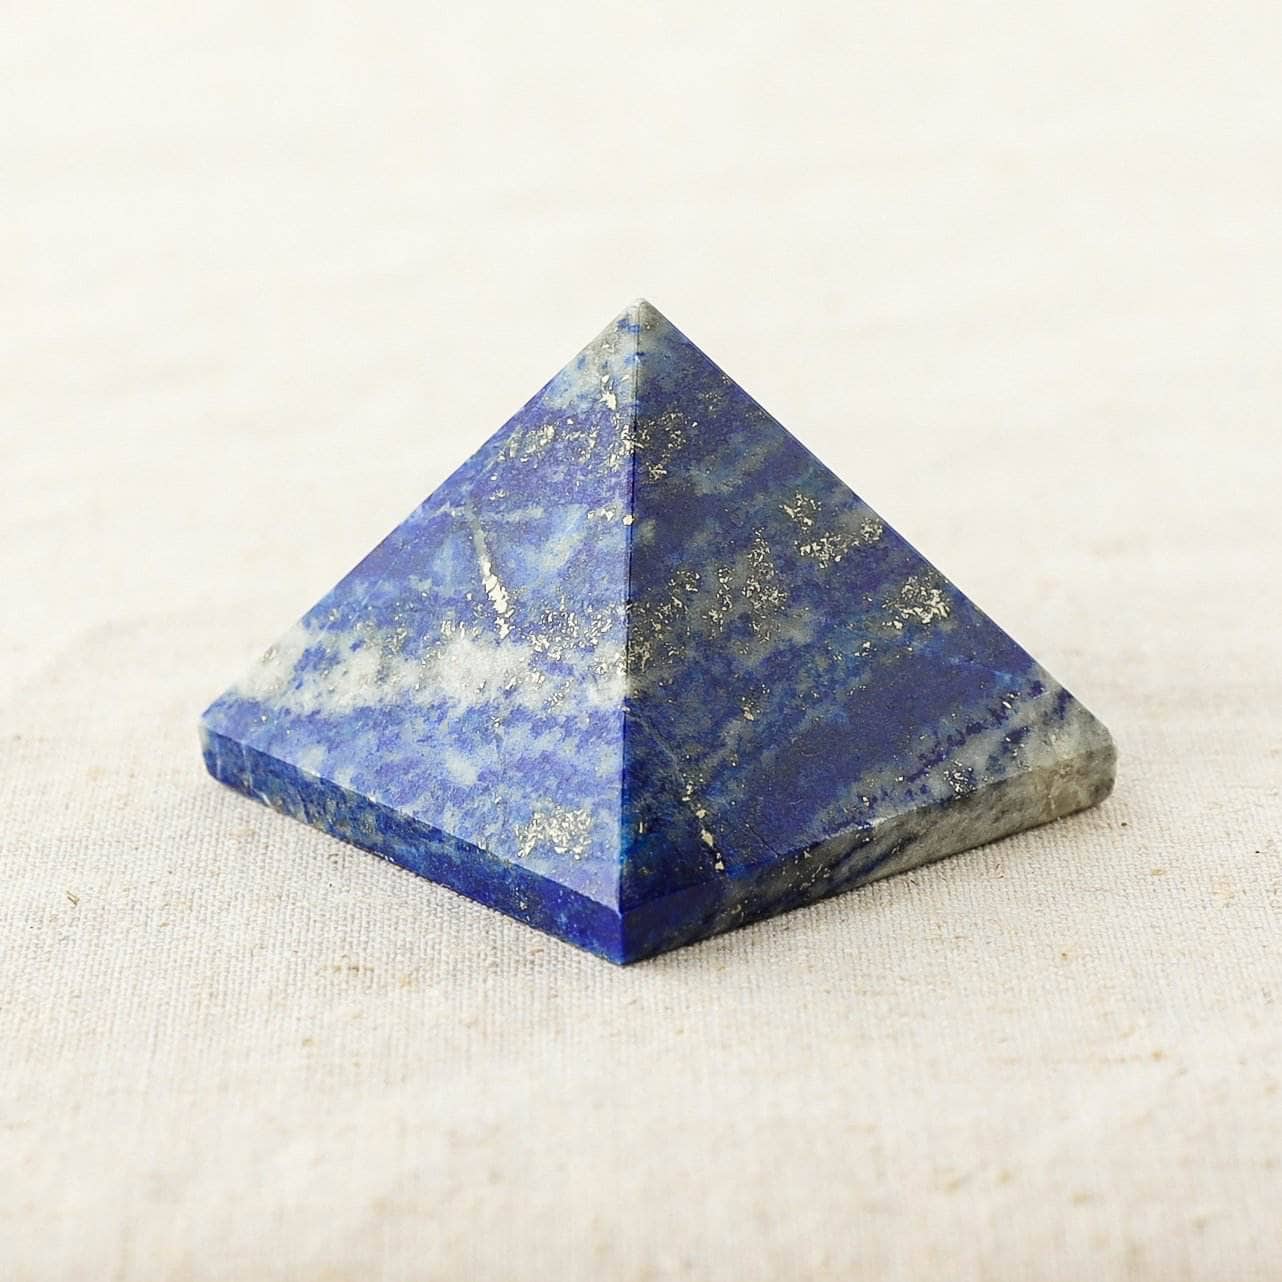 Solid Copper Pyramid: Amplify Your Healing Energy // Tiny Rituals